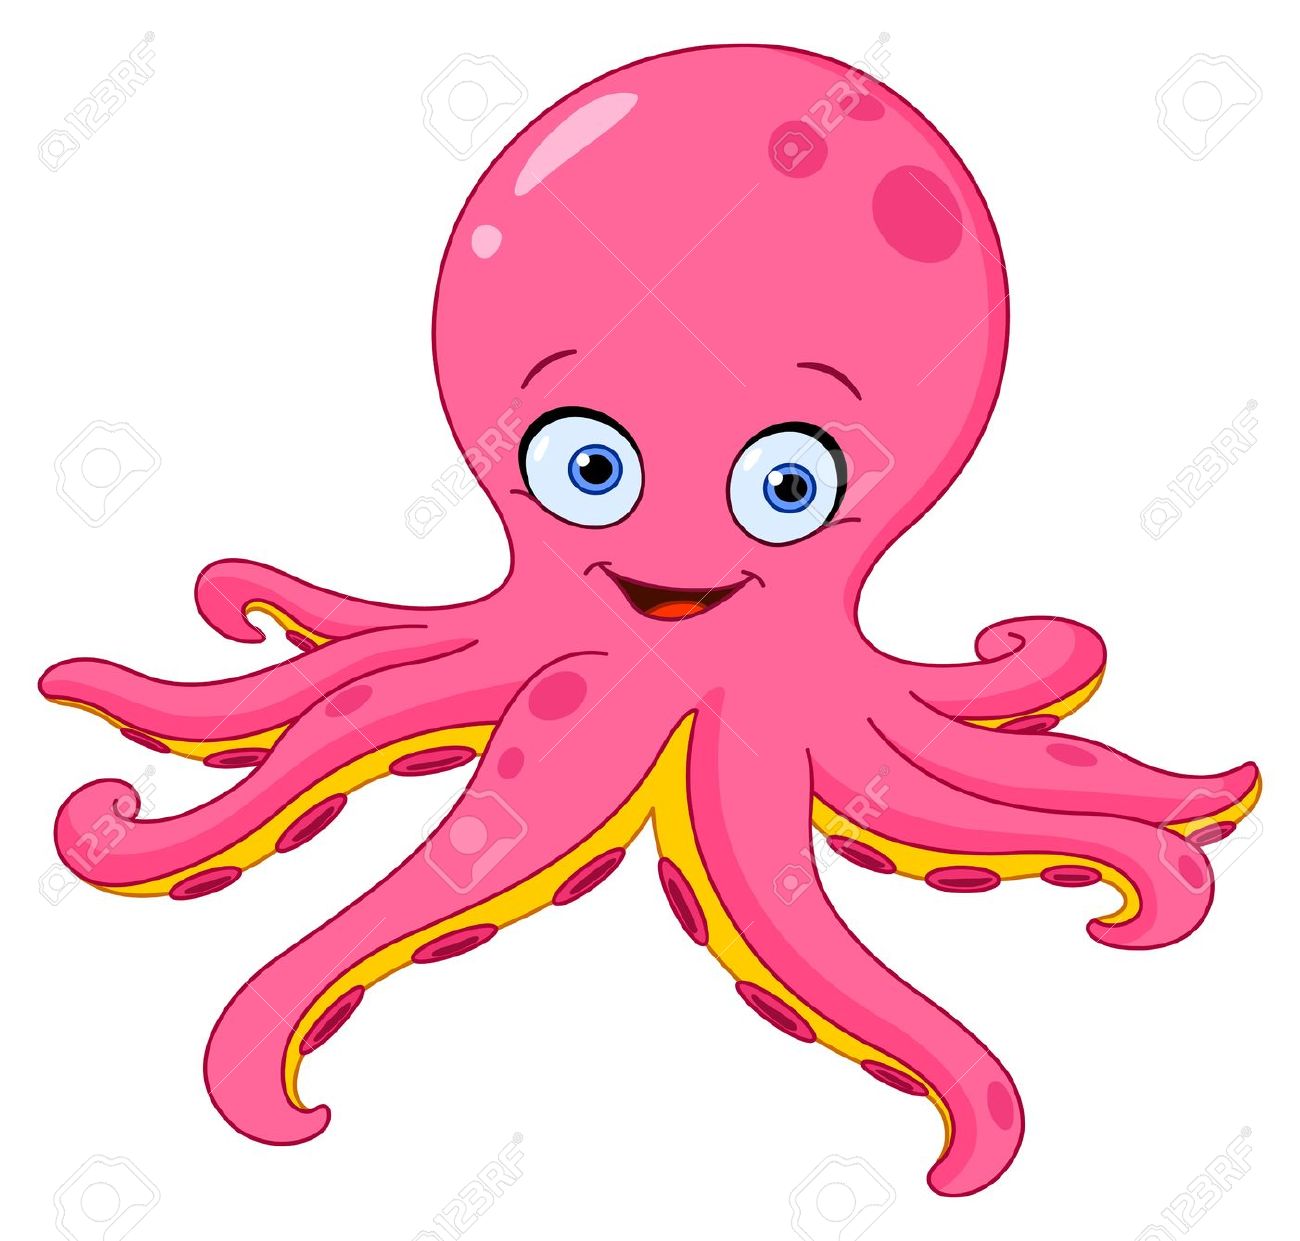 Octopus clipart scary, Octopus scary Transparent FREE for